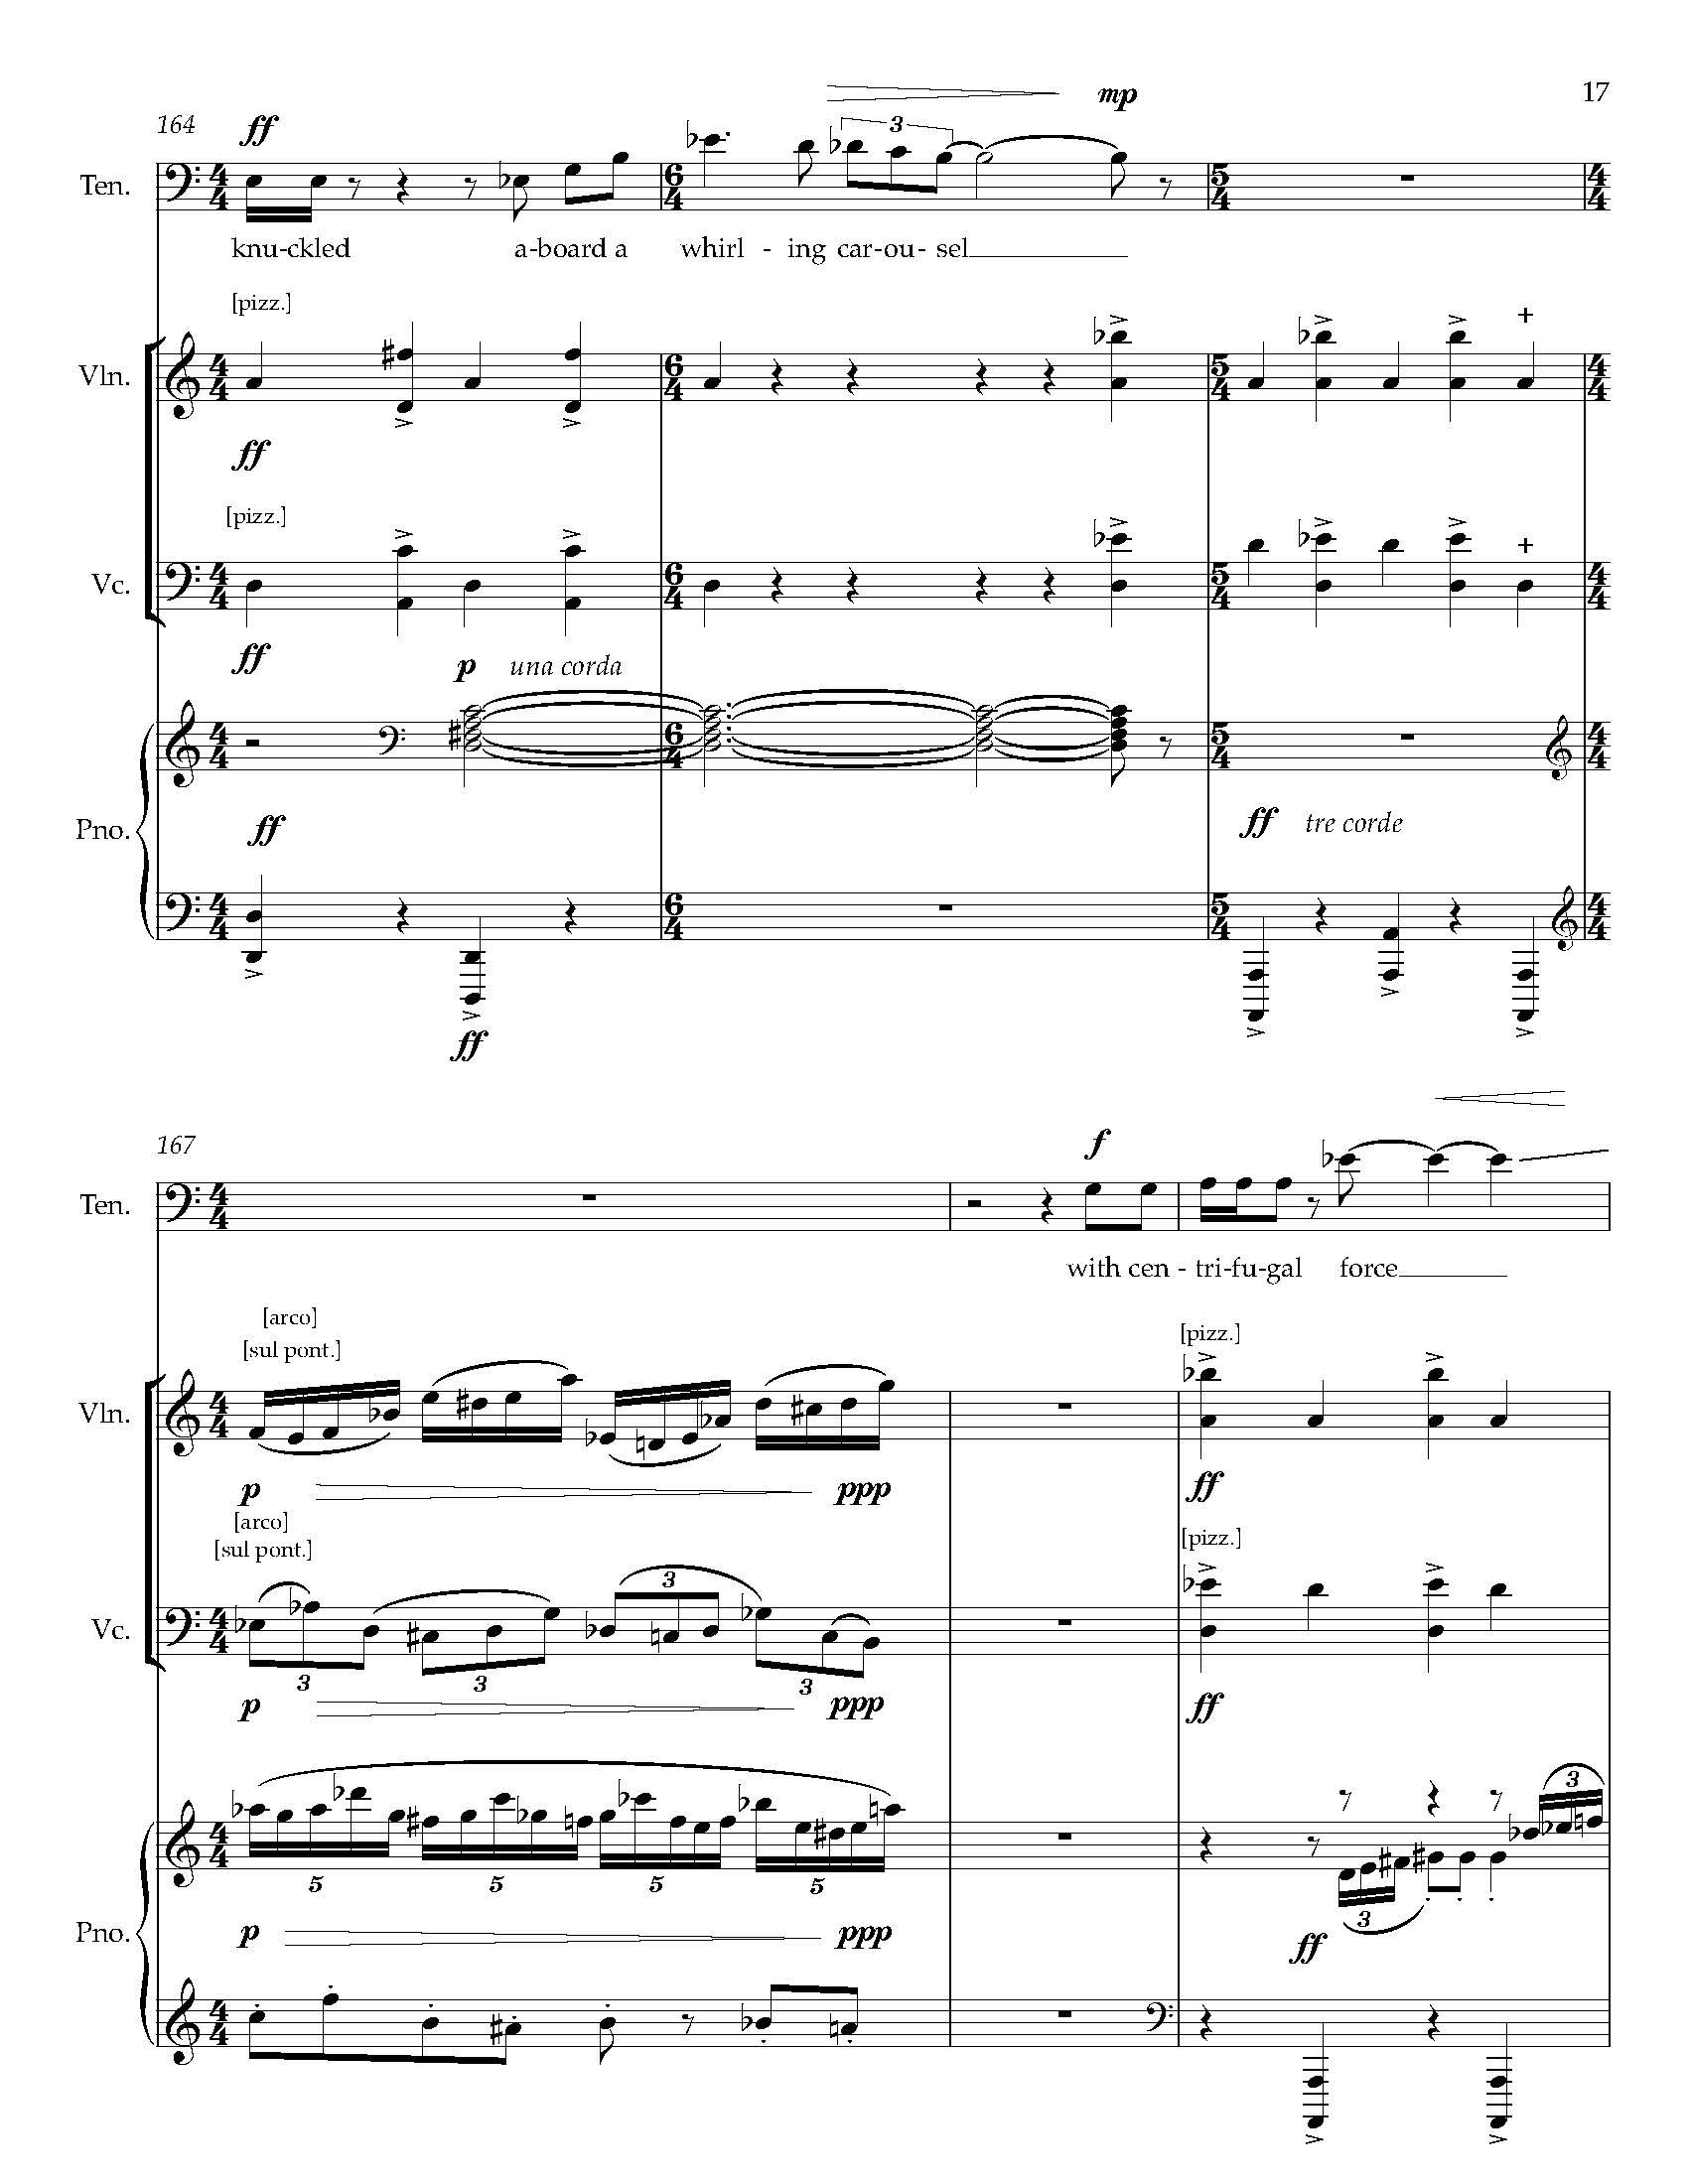 Gursky Songs - Complete Score_Page_25.jpg